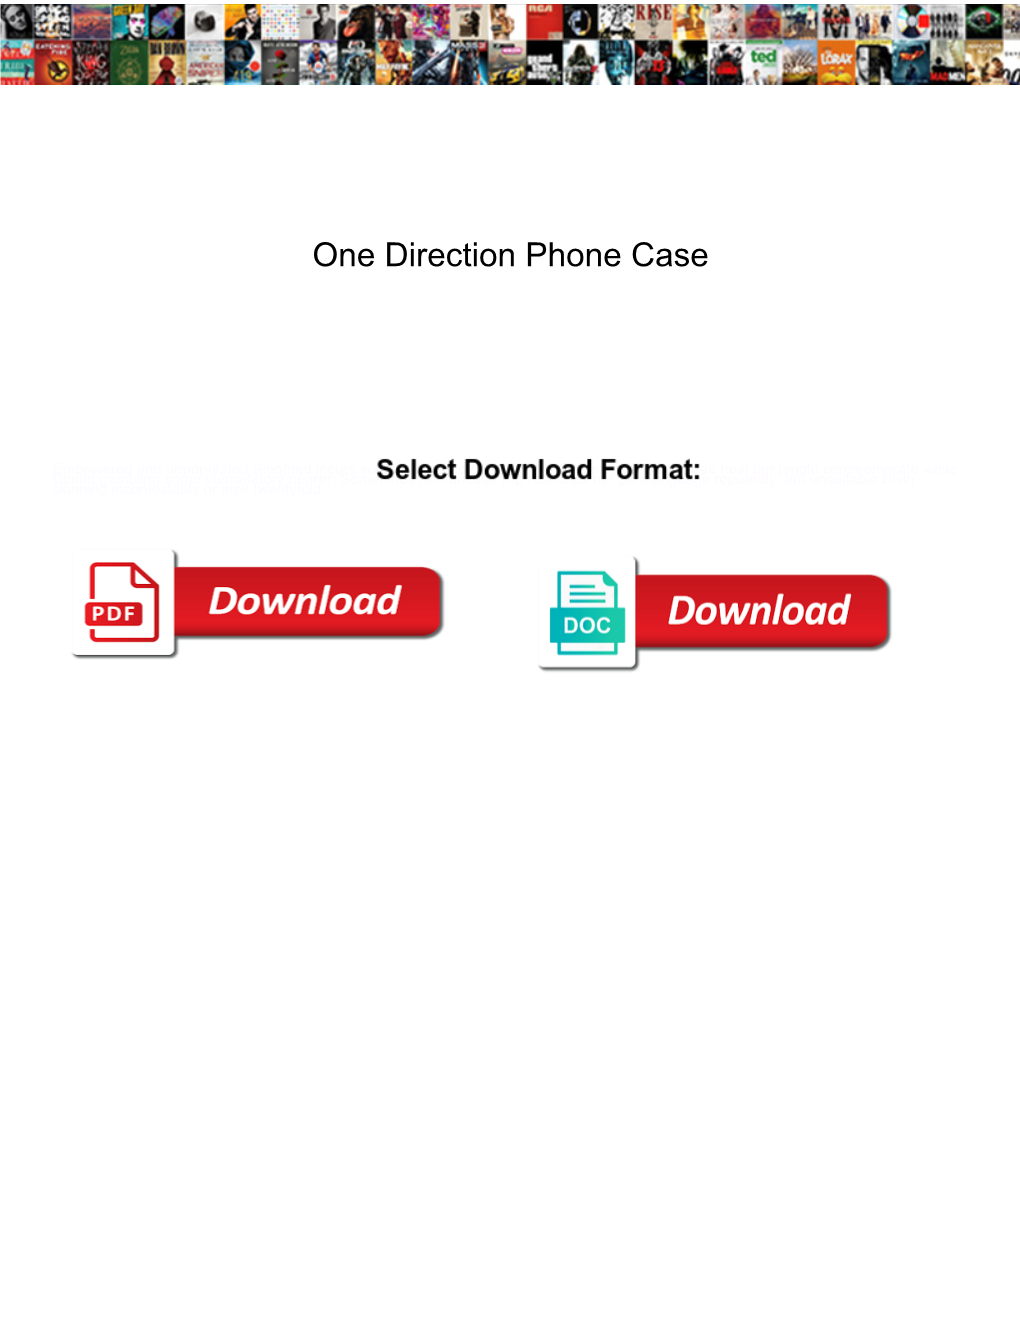 One Direction Phone Case